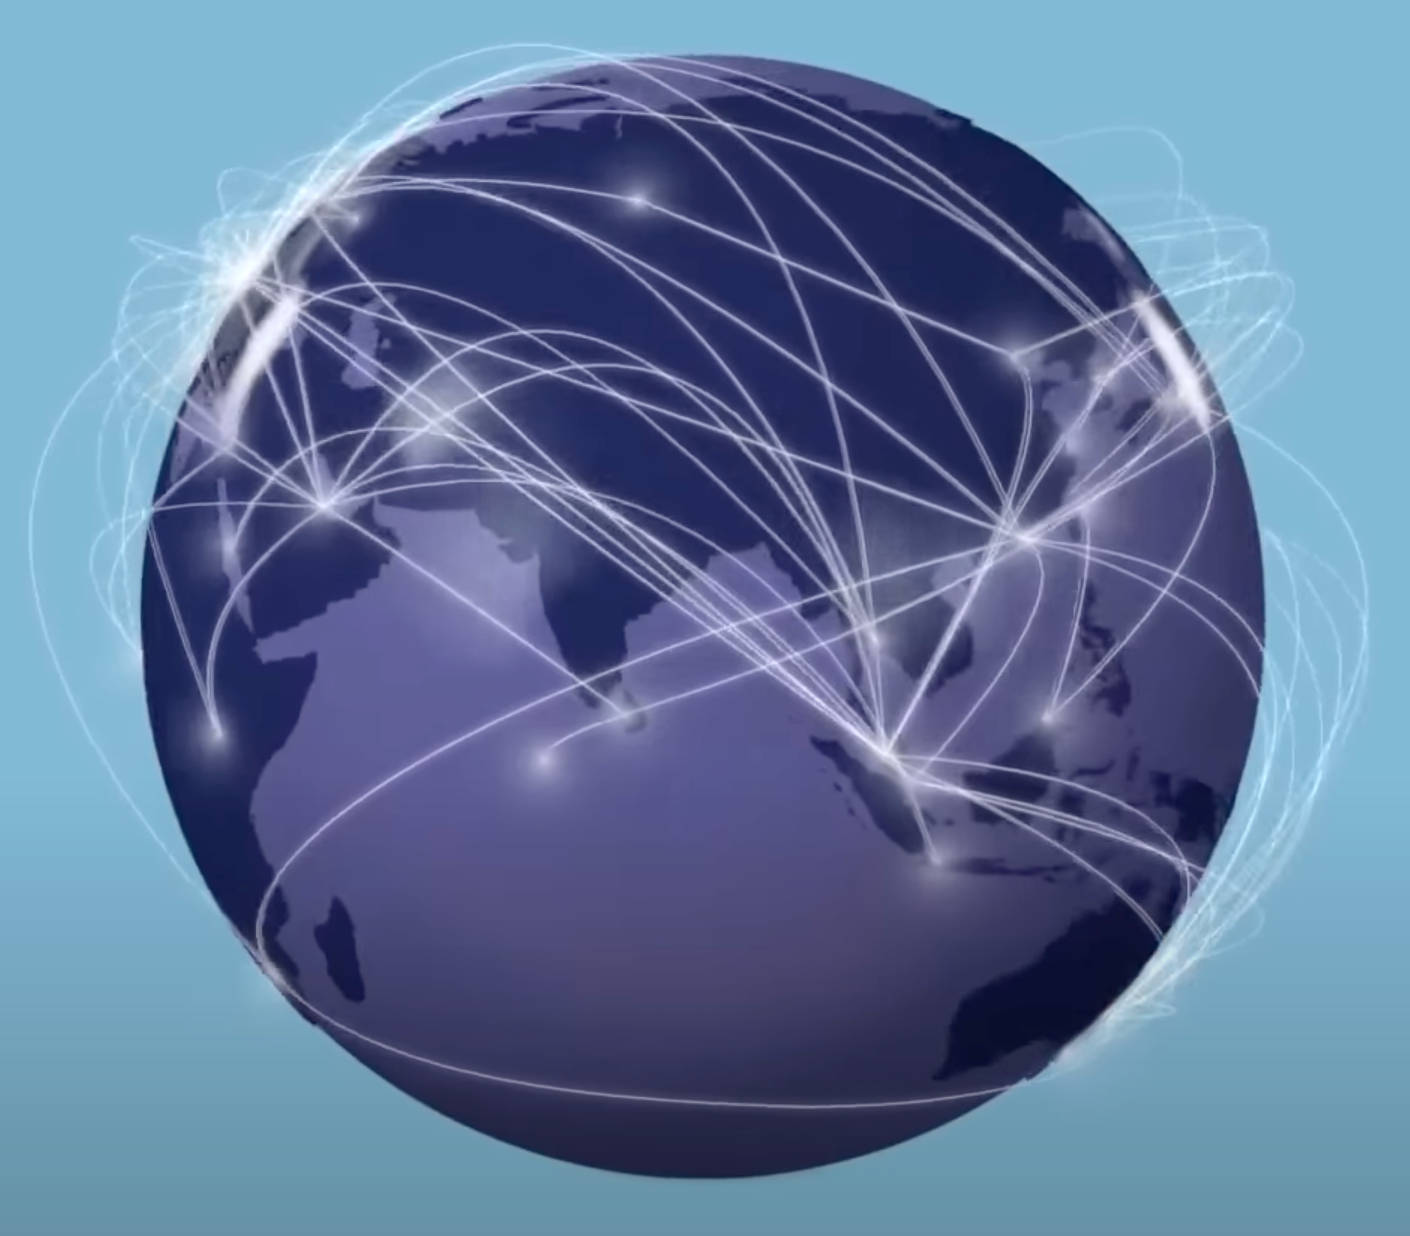 Global coverage map of airline alliances, illustrating interconnected flight routes and regions served by various airlines